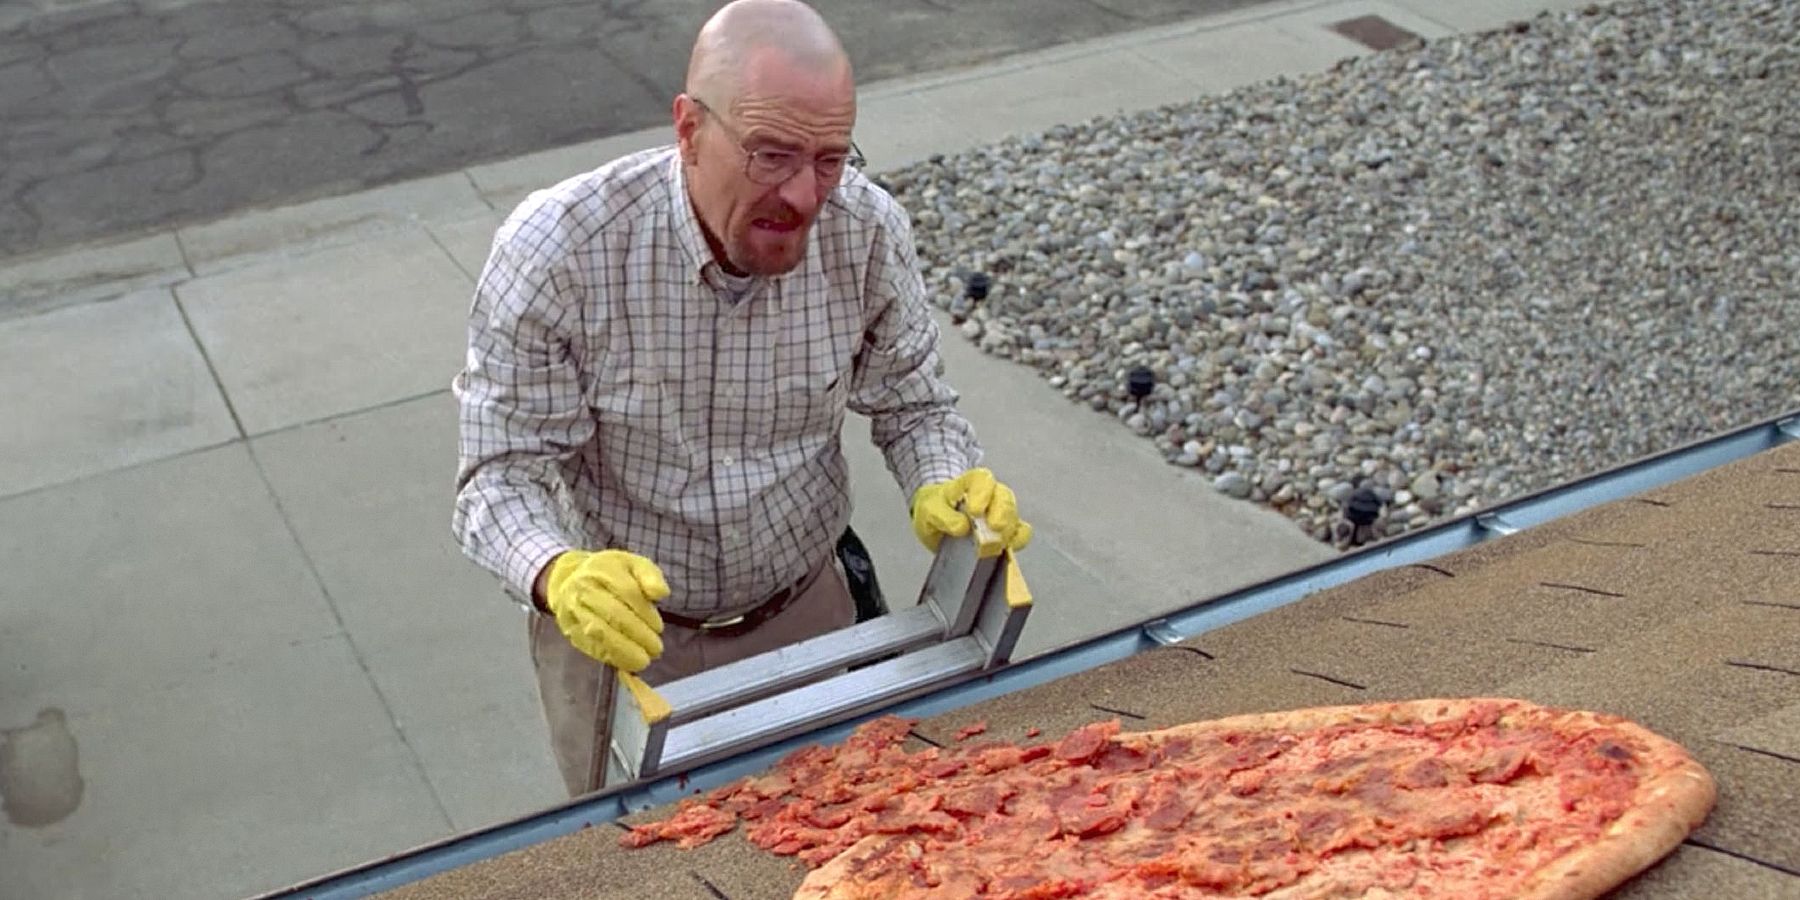 Walter White removes the pizza from the roof of his house in Breaking Bad